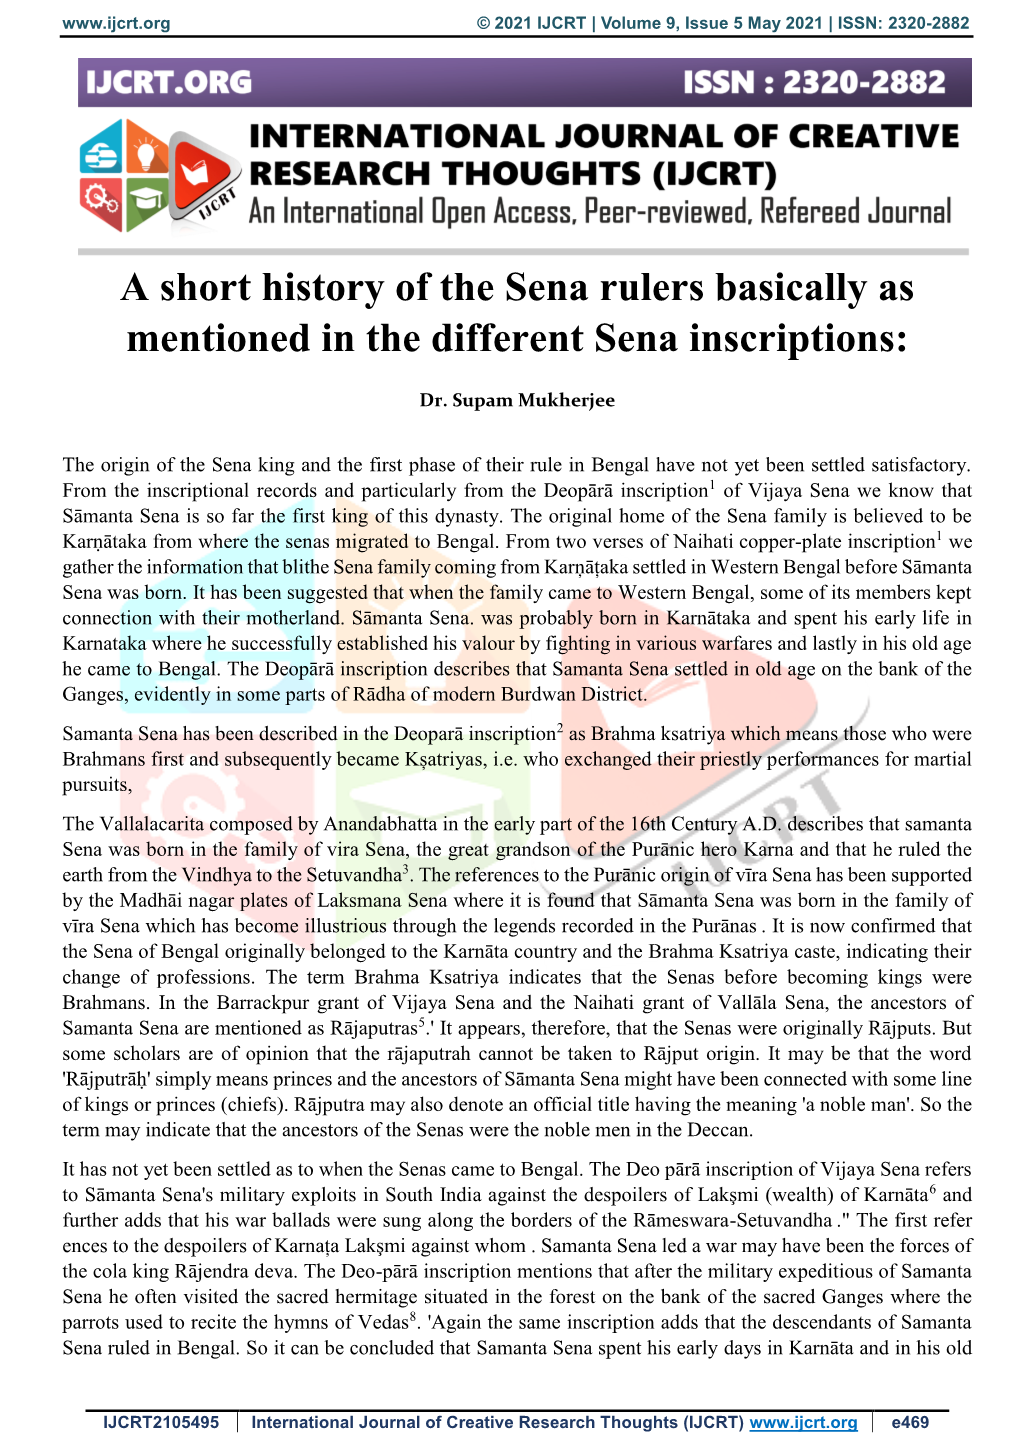 A Short History of the Sena Rulers Basically As Mentioned in the Different Sena Inscriptions